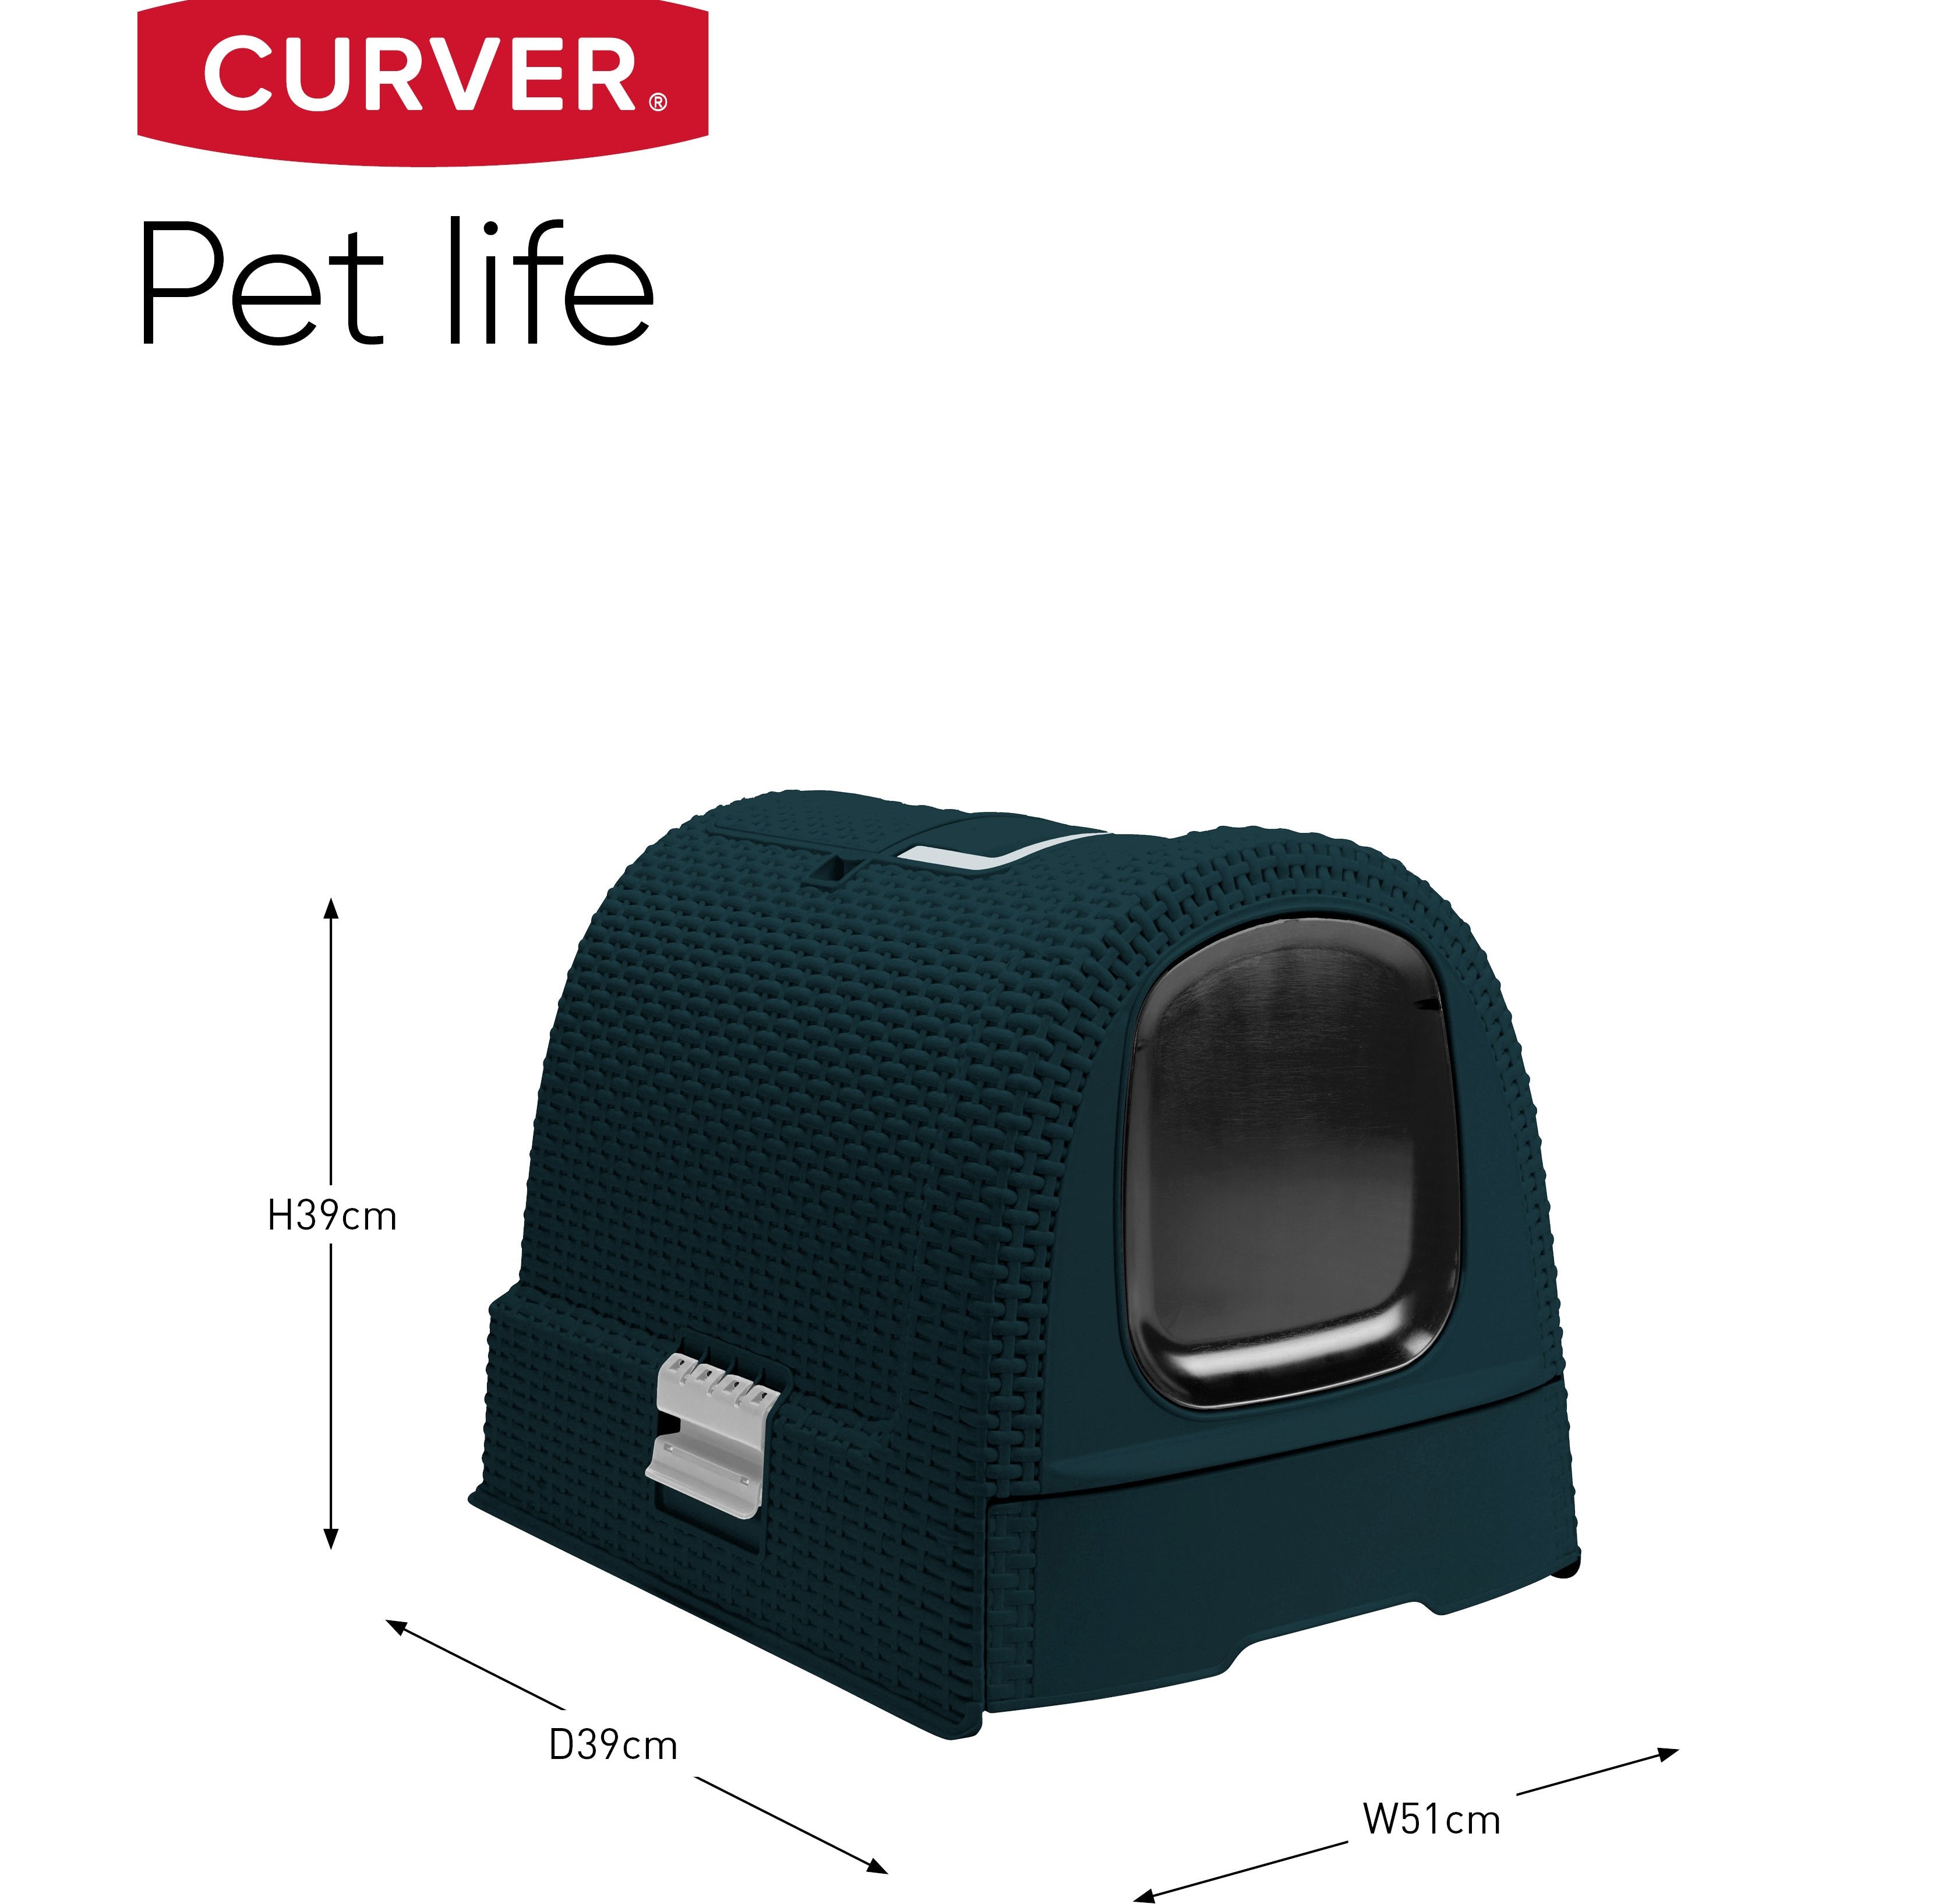 Keter Cat Litter box with dimensions